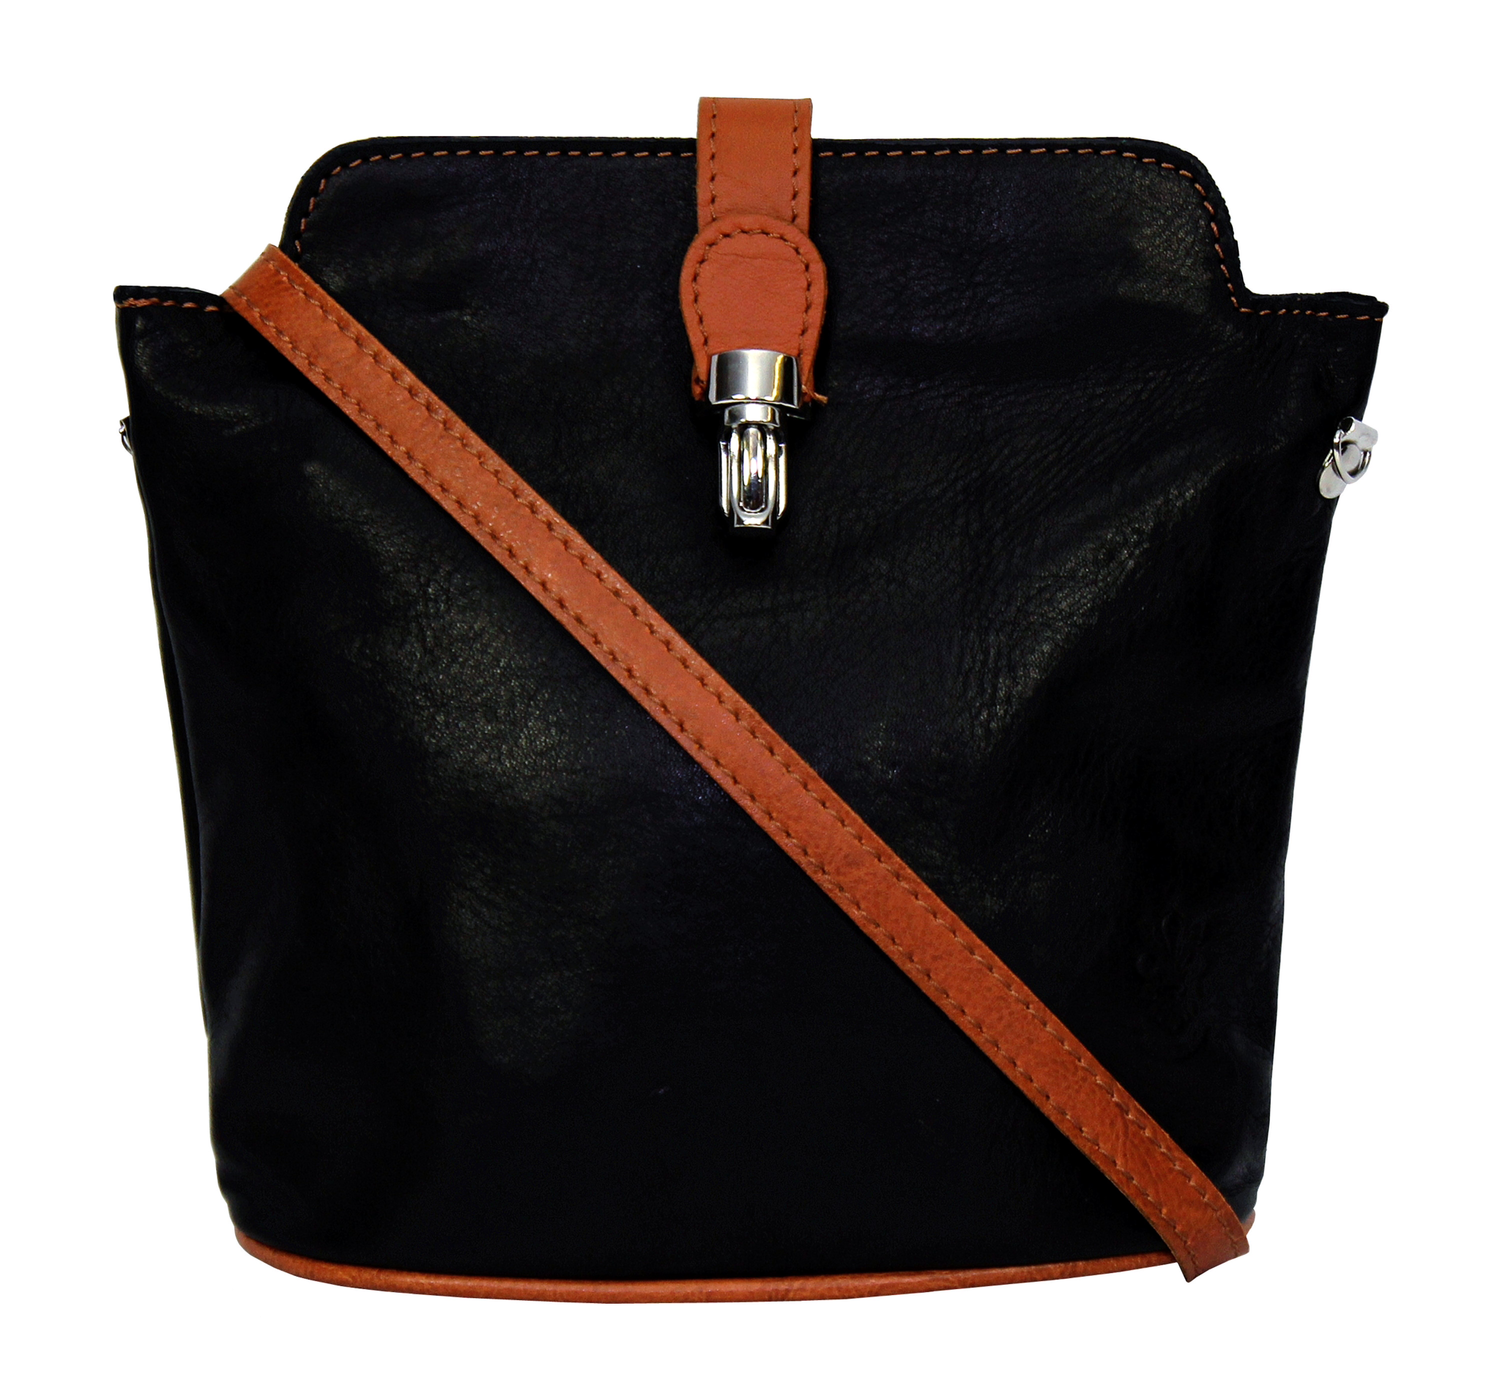 Black Body with Tan Trim Soft Leather Clip Bag 